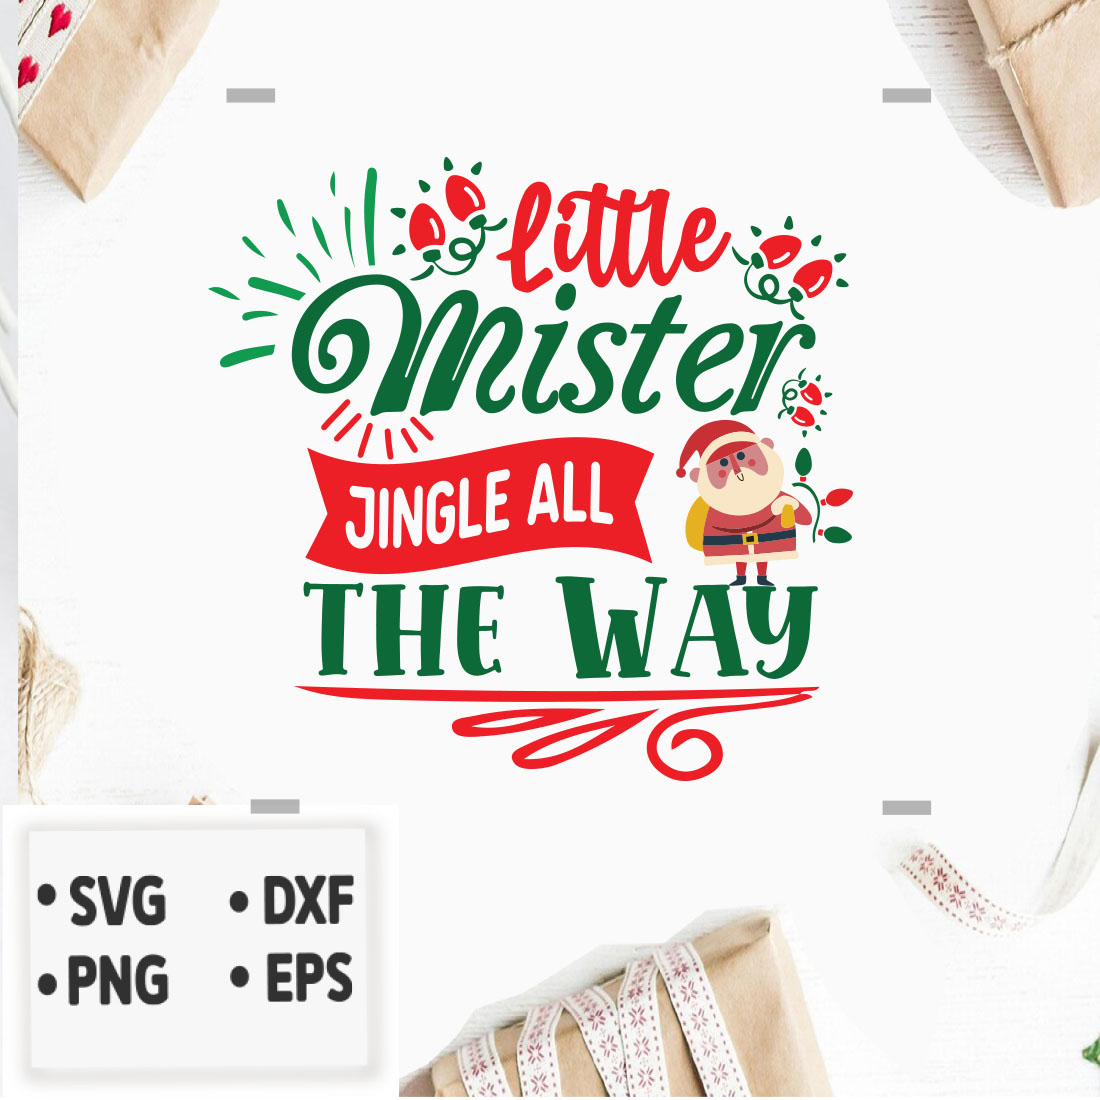 Image with a unique print Little Mister Jingle all the Way.